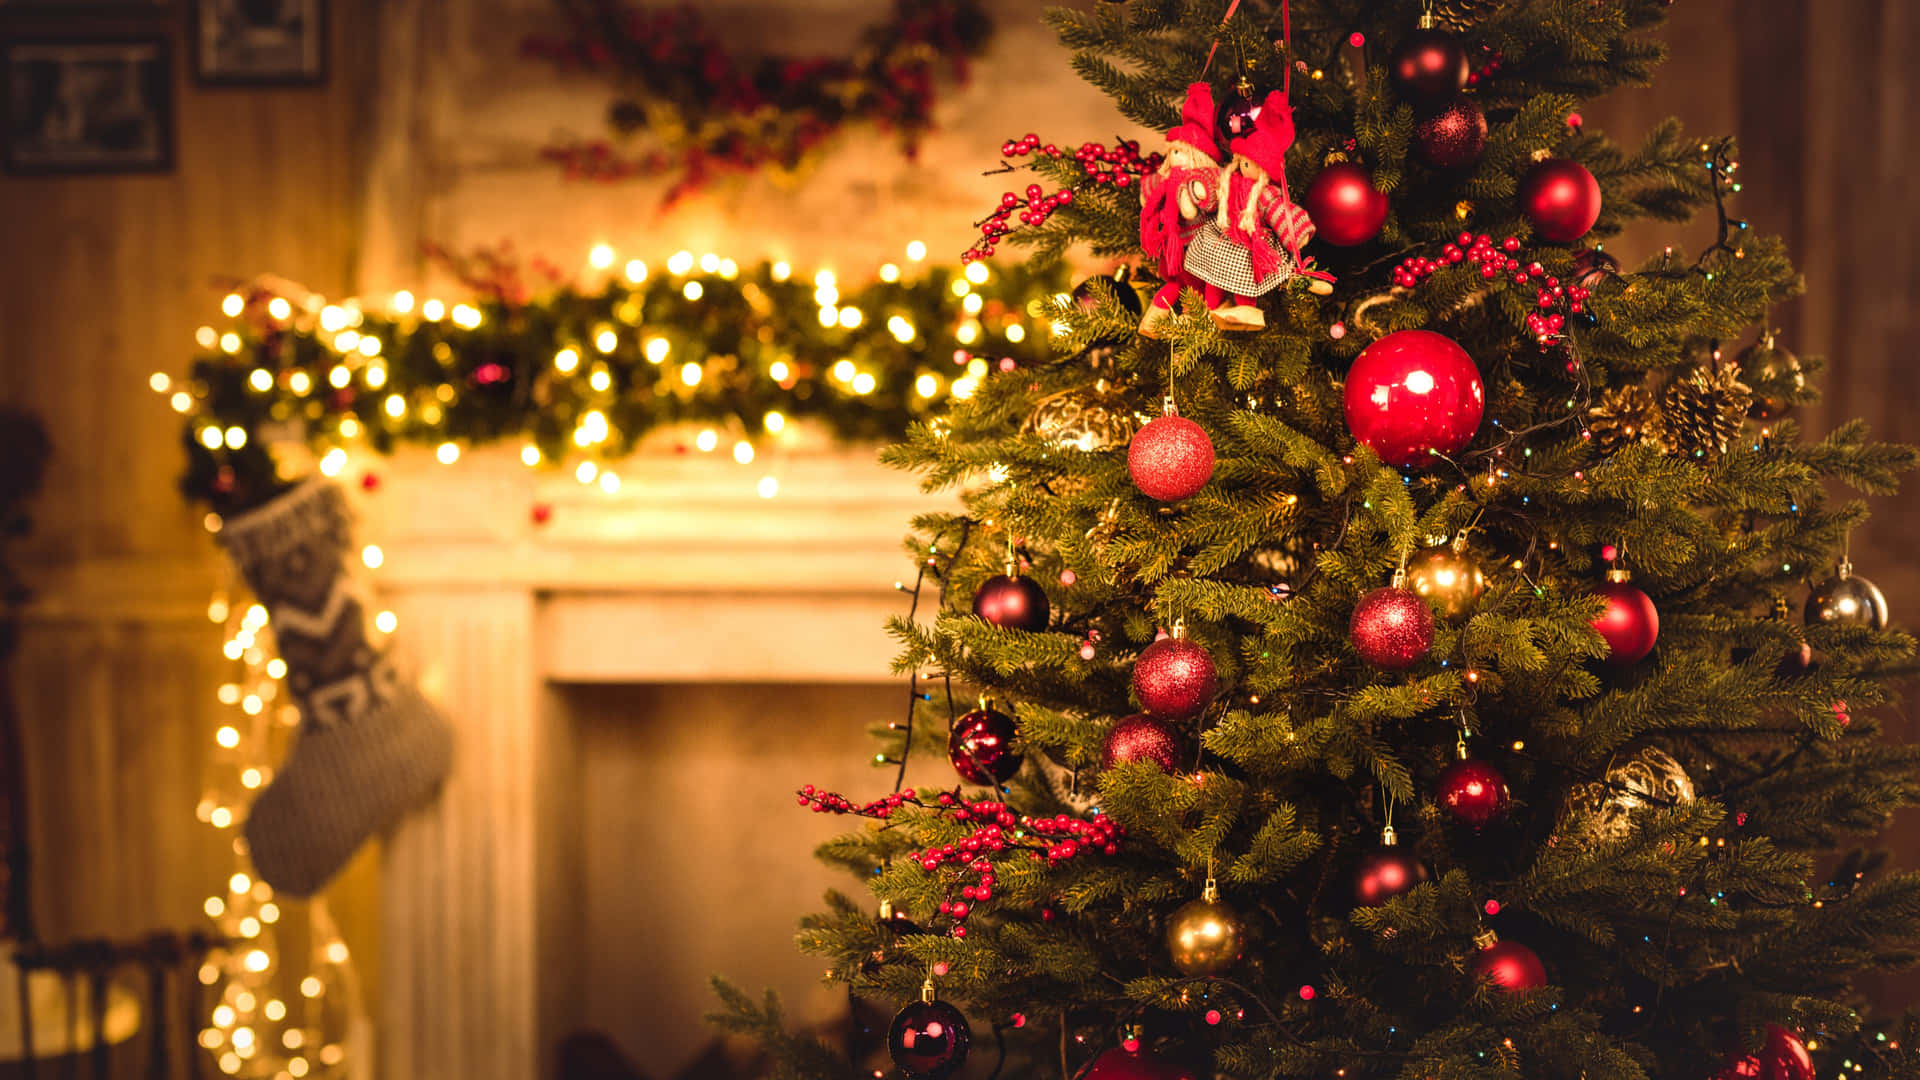 A Christmas Tree With Decorations In Front Of A Fireplace Wallpaper